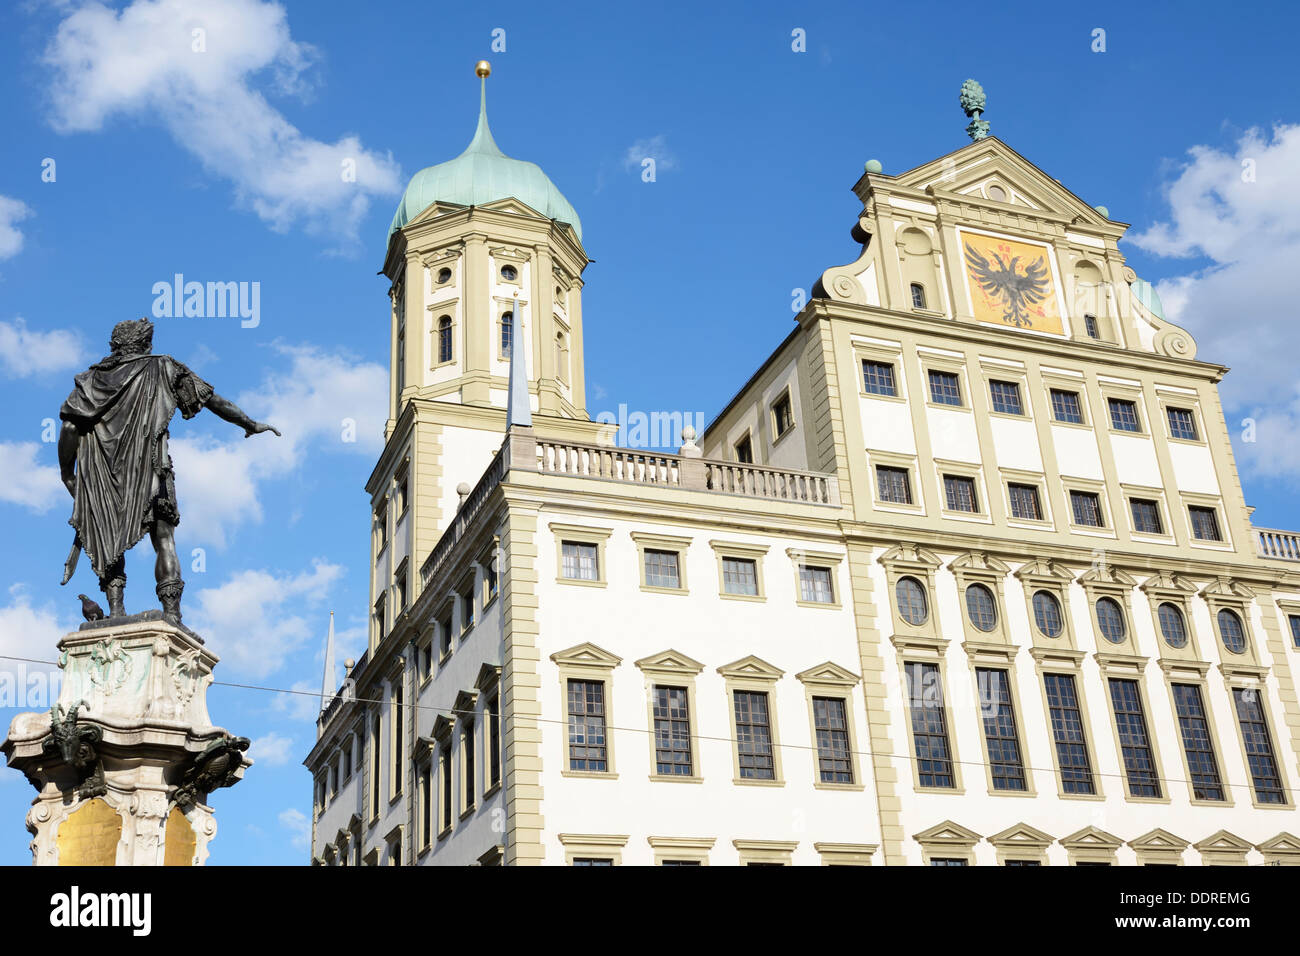 The Augustus fountain wit emperor Augustus (built 1594) in Augsburg with the town hall in the background. Stock Photo